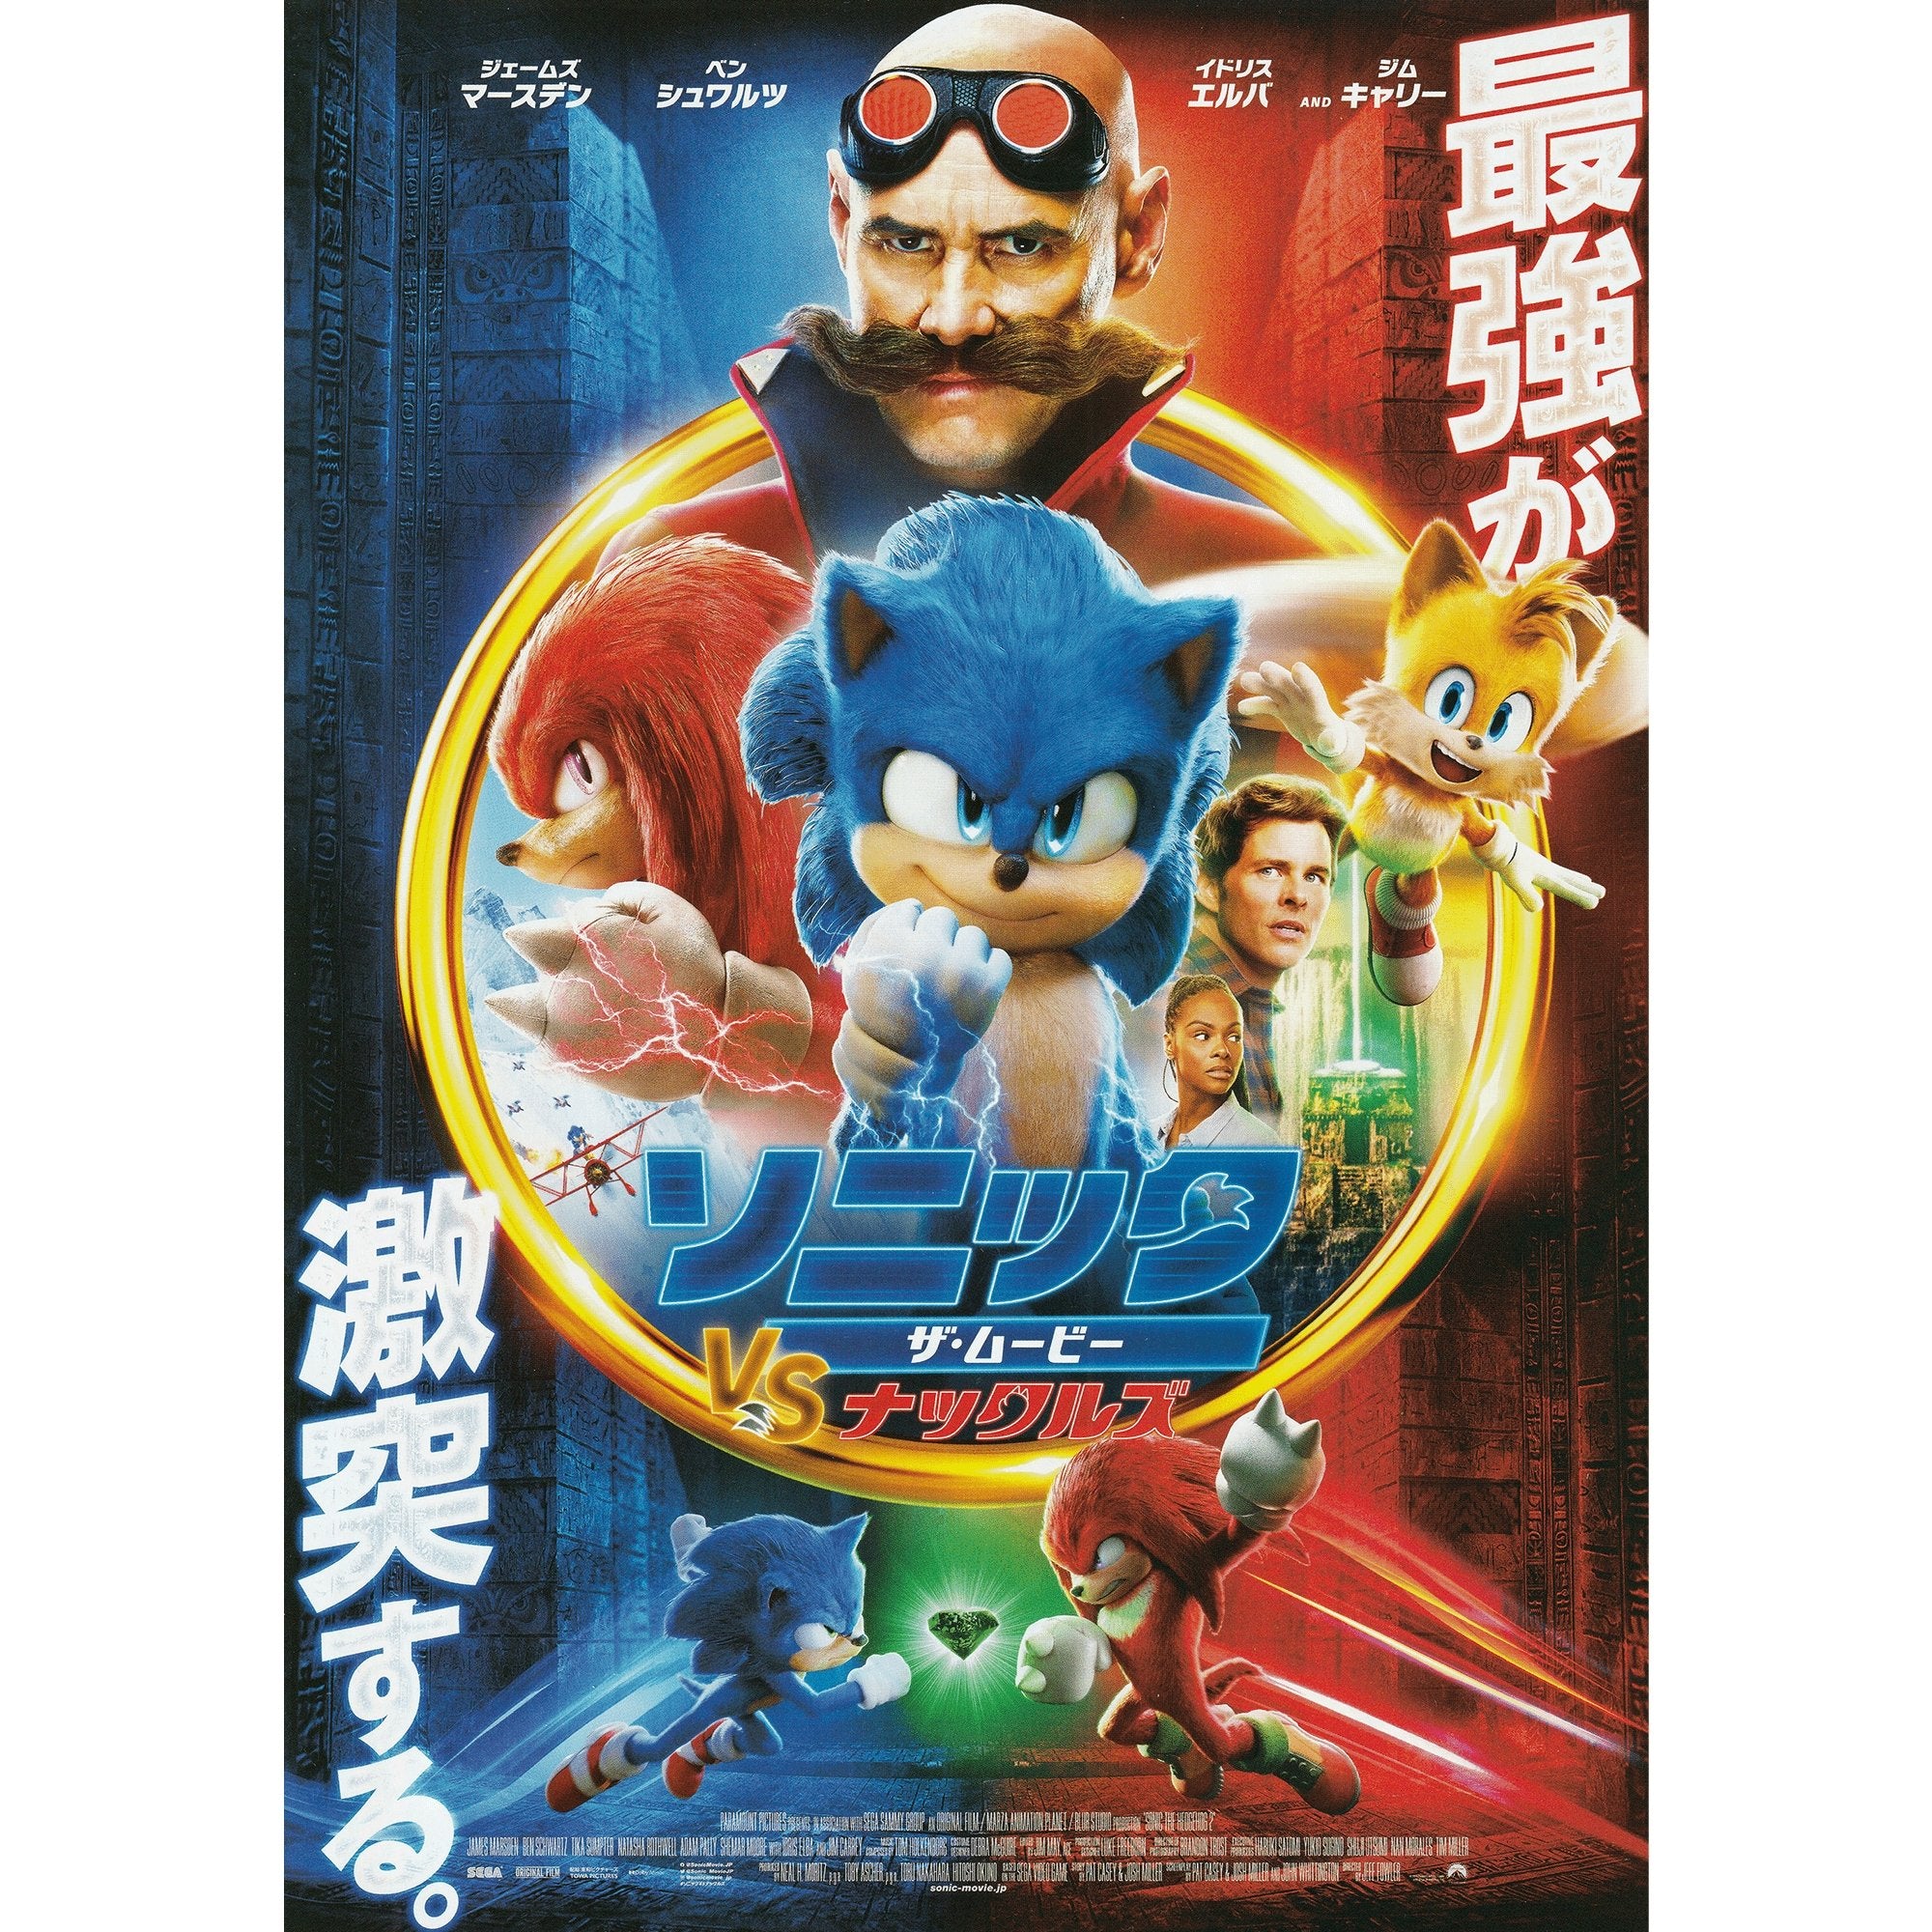 This is another Japanese poster for the Sonic movie. : r